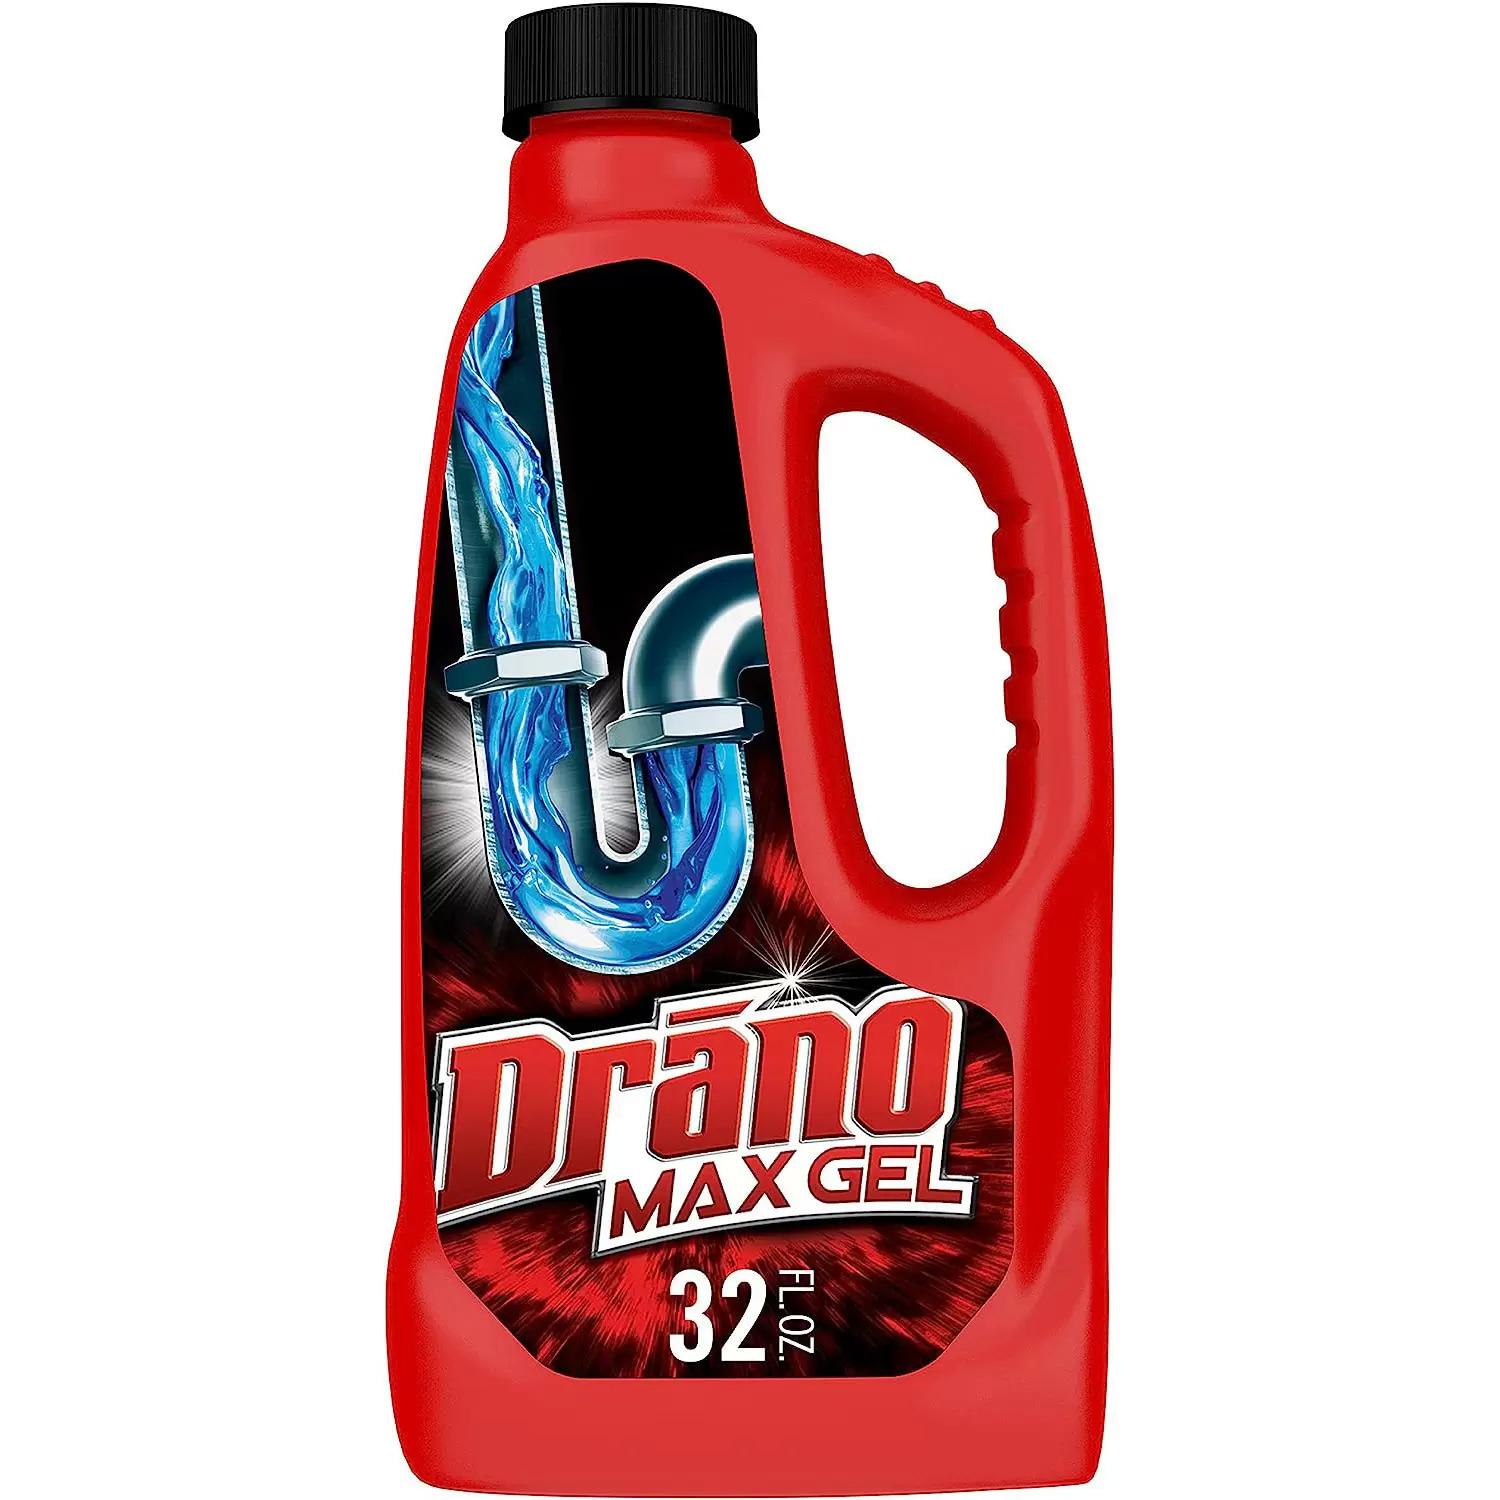 Drano Max Gel Drain Clog Remover and Cleaner 32oz for $3.51